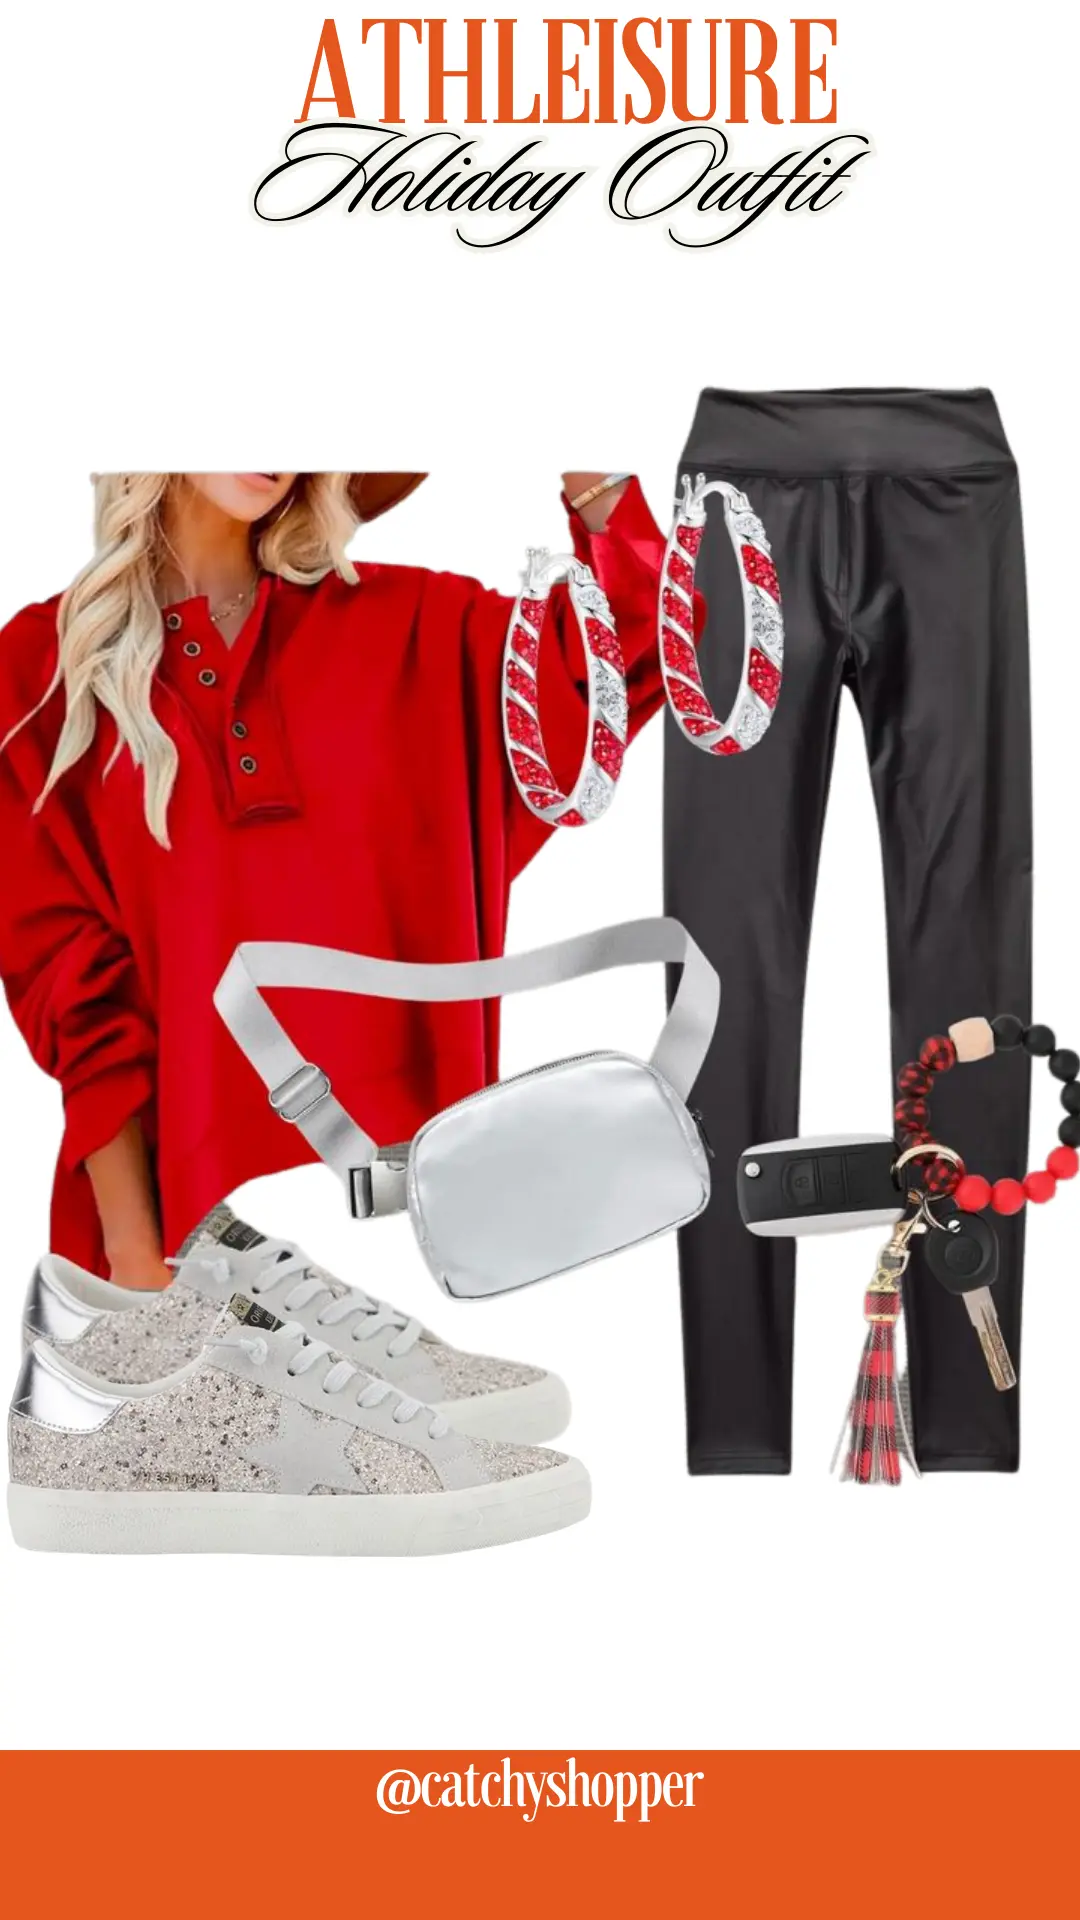 Athleisure Holiday Outfit 